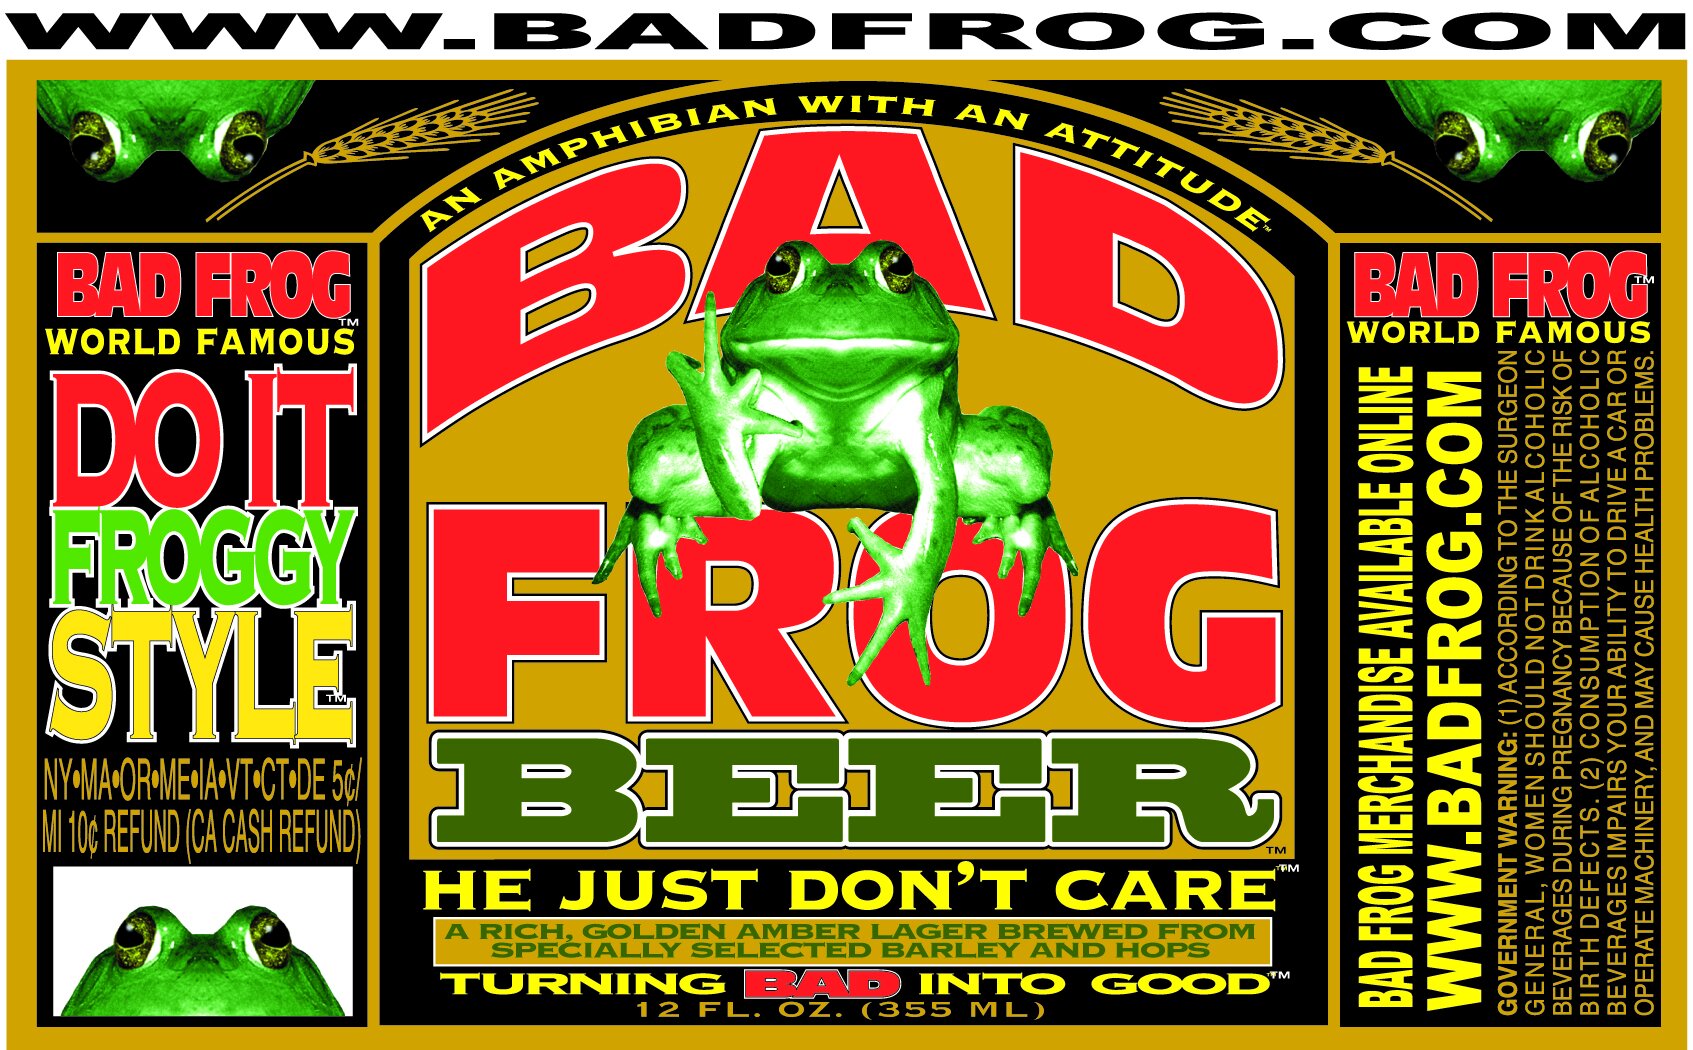 Gallery — BAD FROG